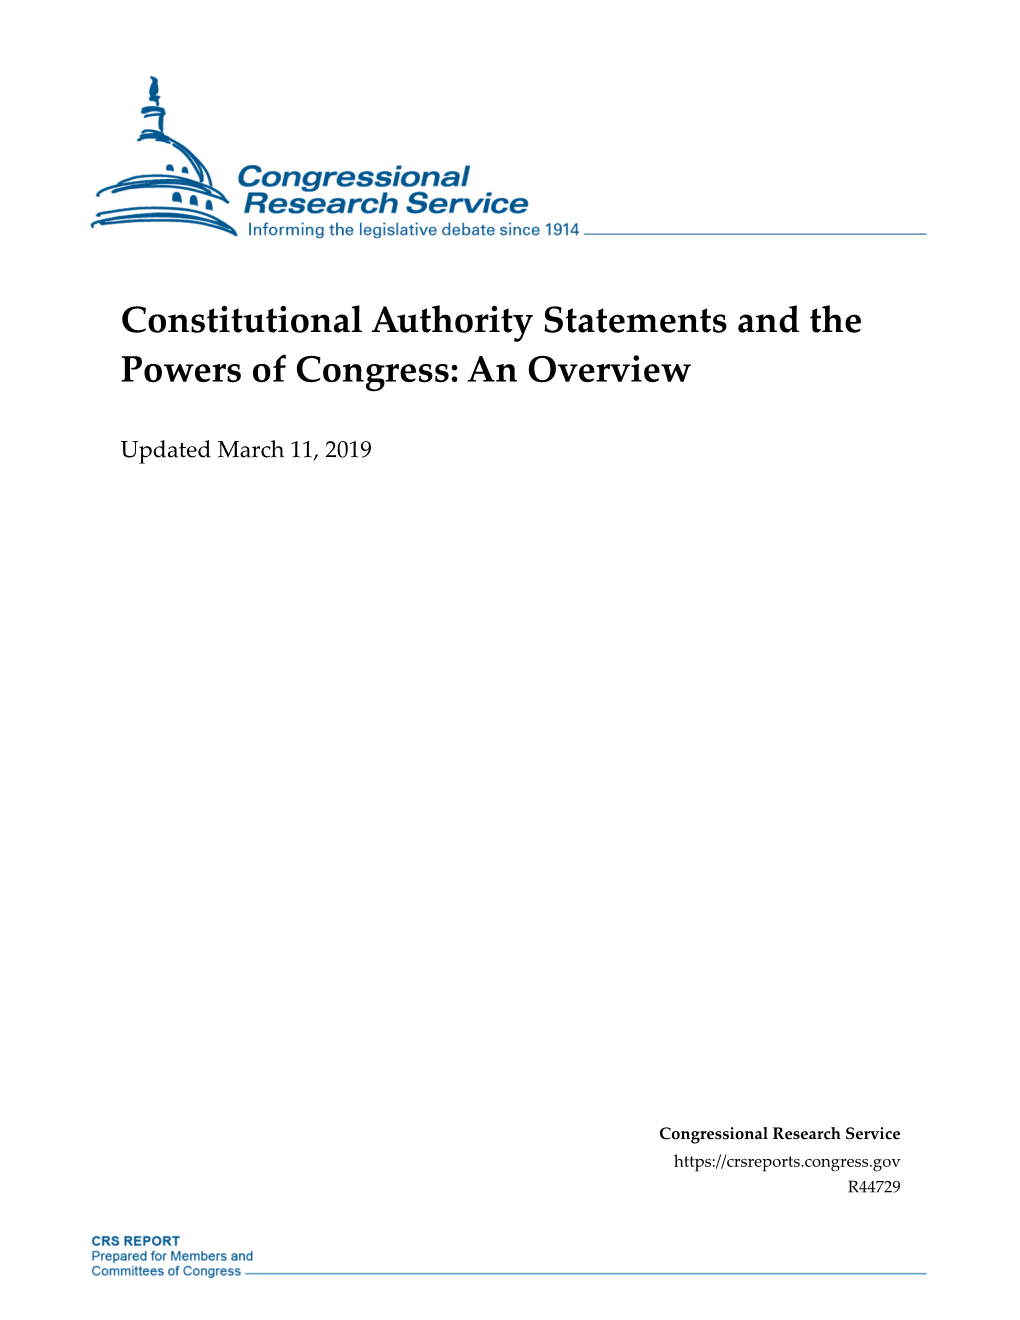 Constitutional Authority Statements and the Powers of Congress: an Overview